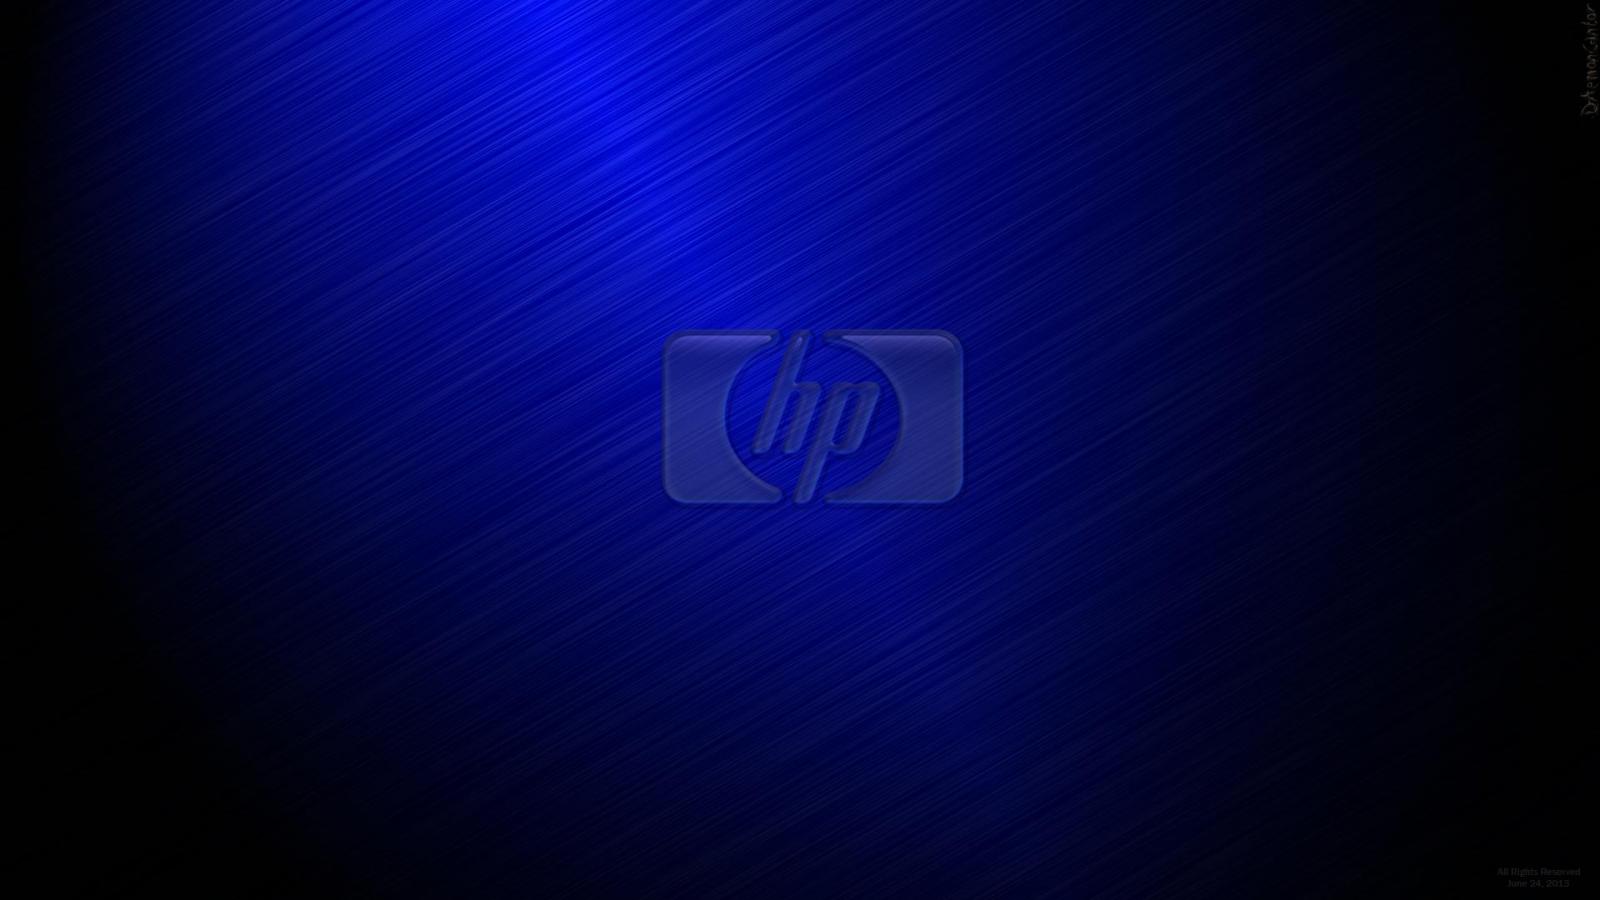 Hp Blue High Quality And Resolution Wallpaper On